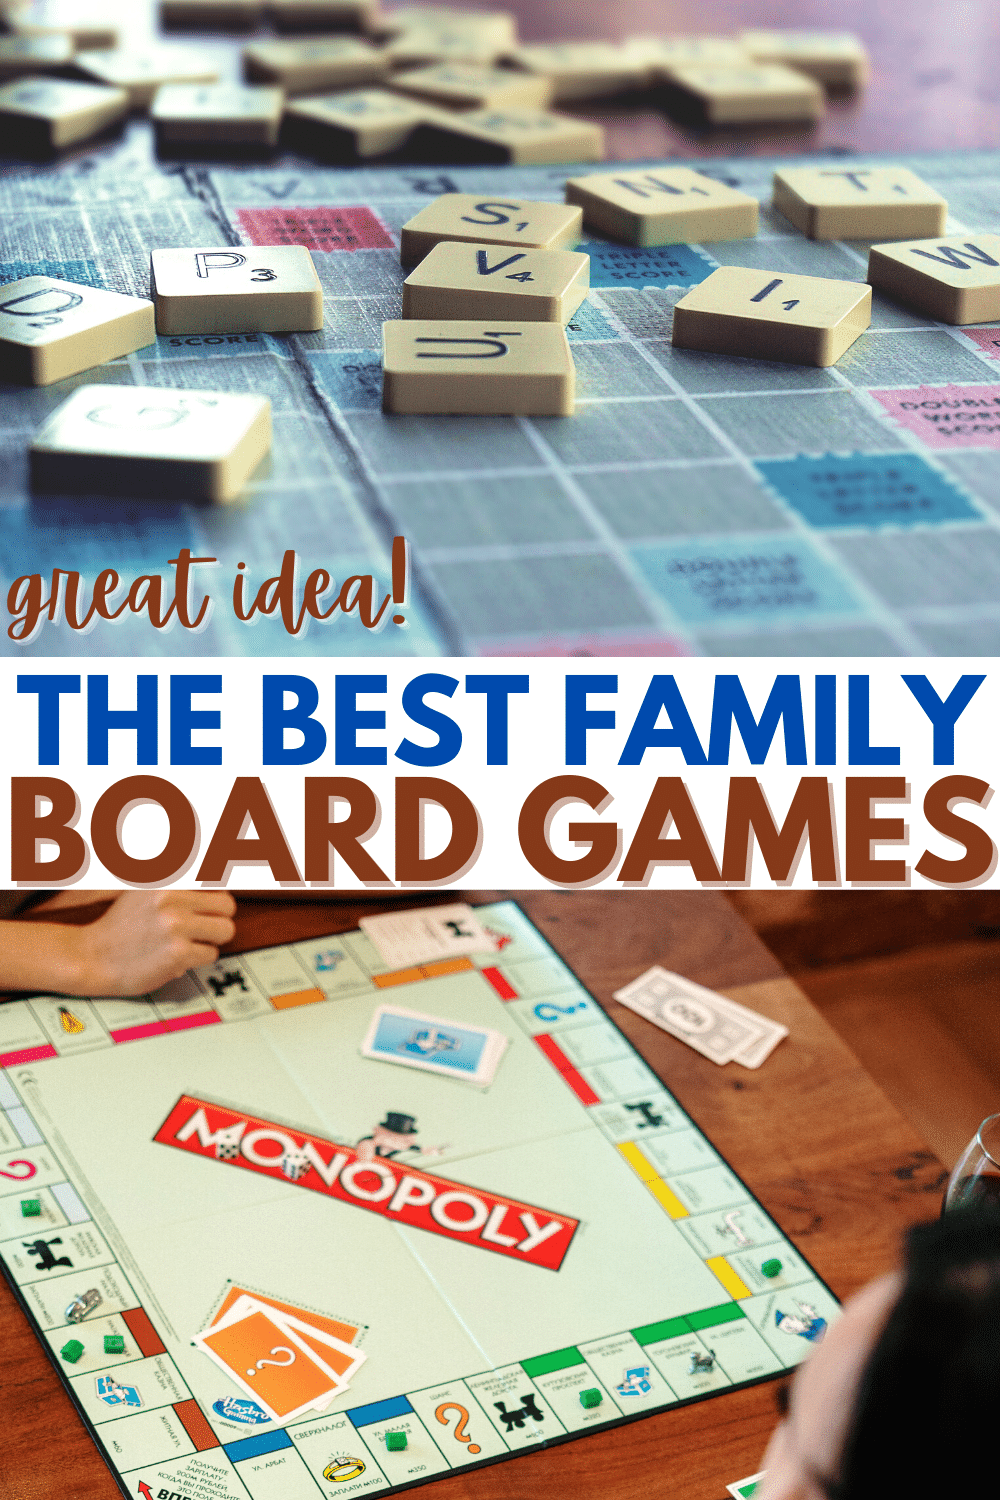 These are the best family board games for families with kids of all ages - tried, tested, and recommended by my family of six. #boardgames #familyfun #familygames #familytime via @wondermomwannab